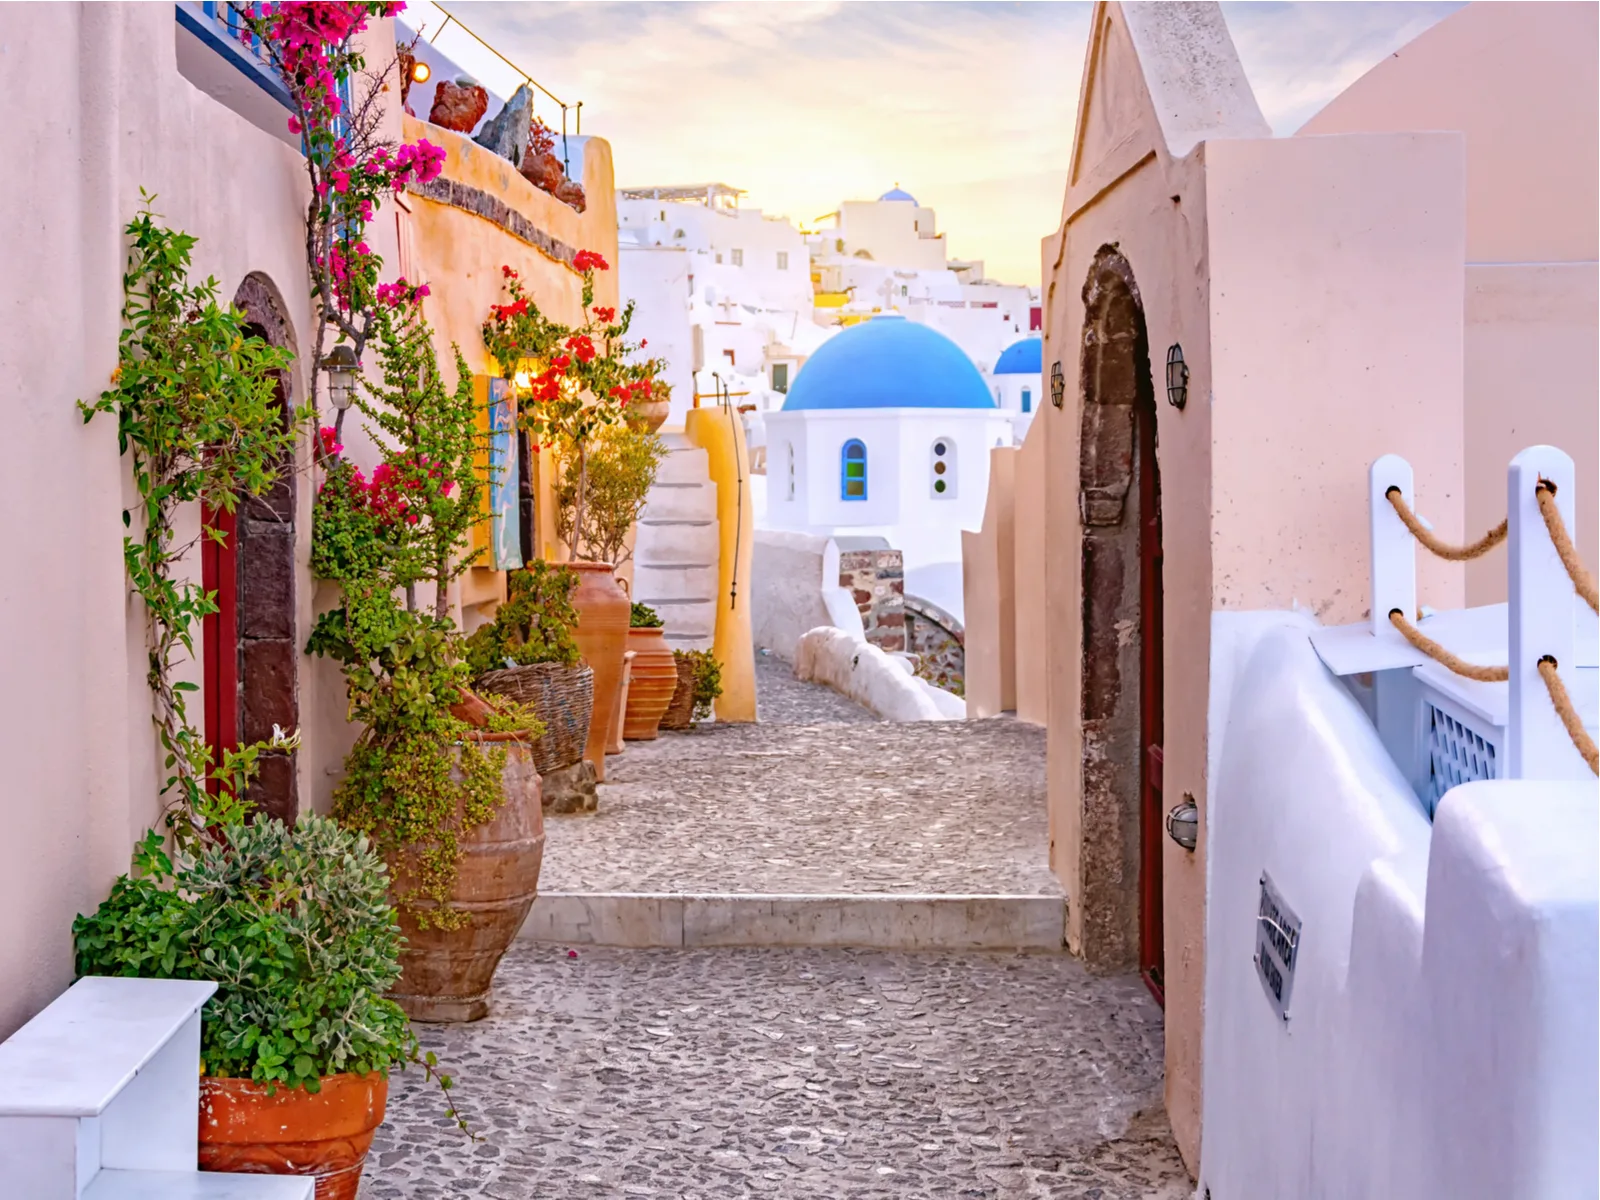 Exploring a narrow street in Oia, one of the best things to do in Santorini